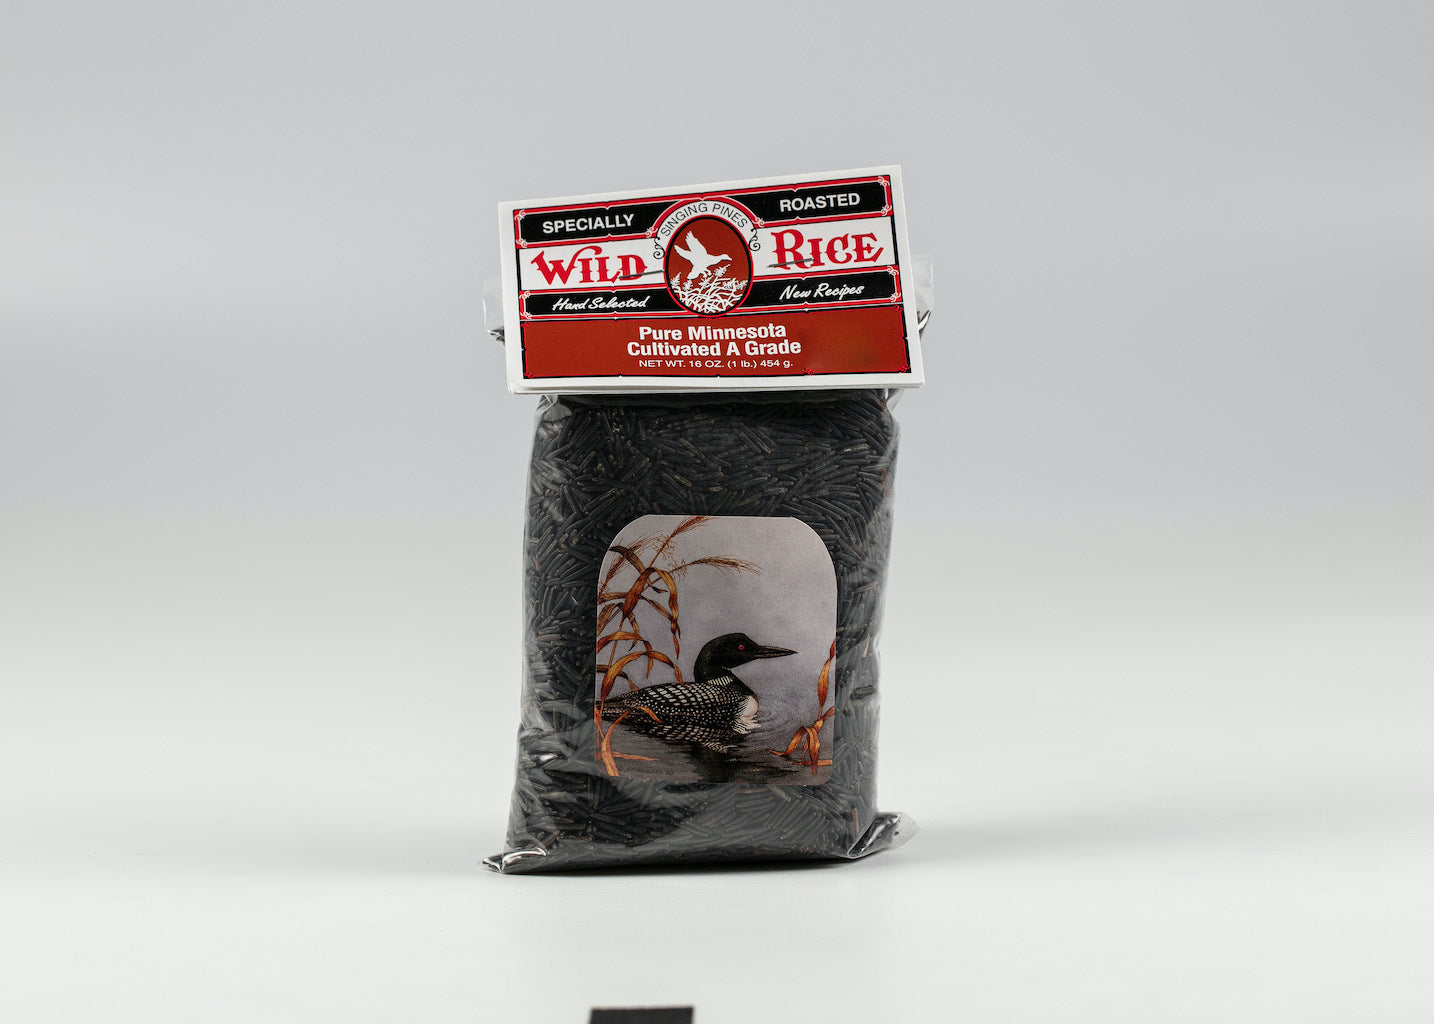 PURE MINNESOTA CULTIVATED A GRADE WILD RICE 16 OZ GROWN IN GRAND RAPIDS MN